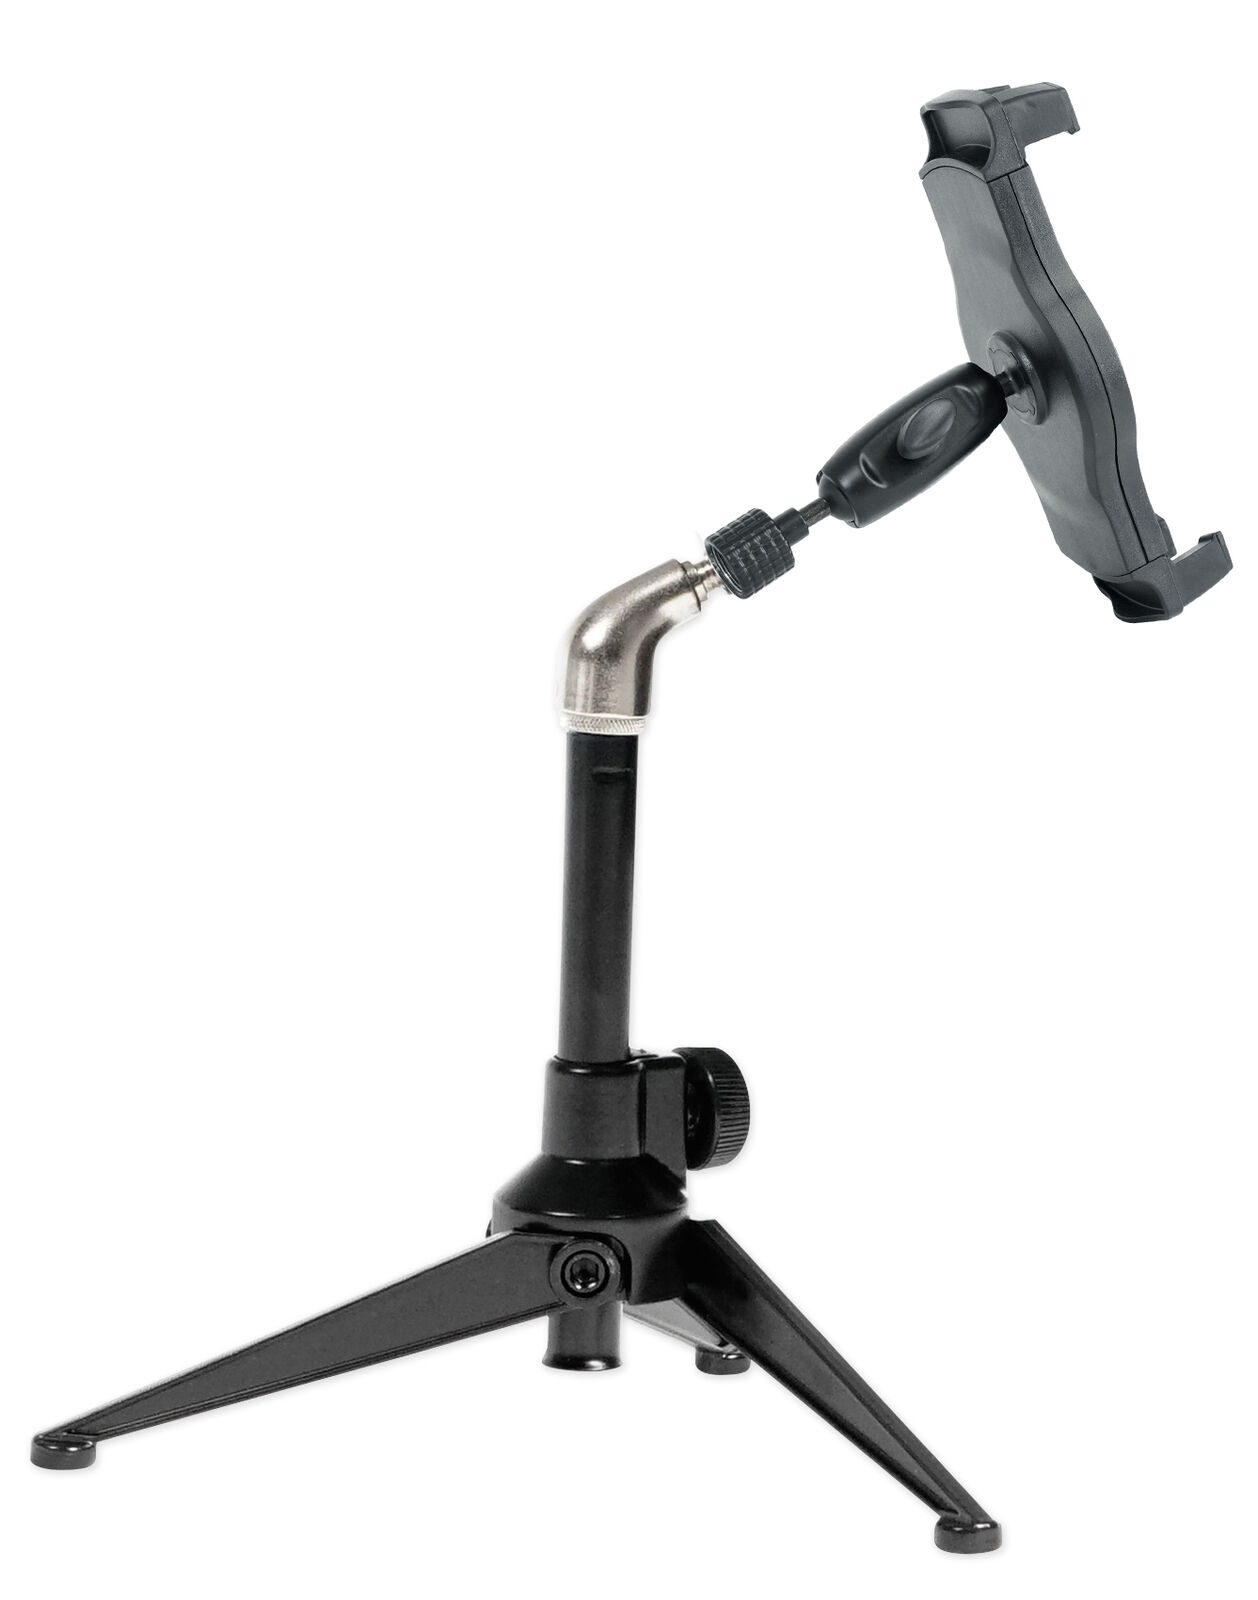 Rockville iPad/iPhone/Kindle Hands-Free Tabletop Tripod Stand 4 Cooking/Reading